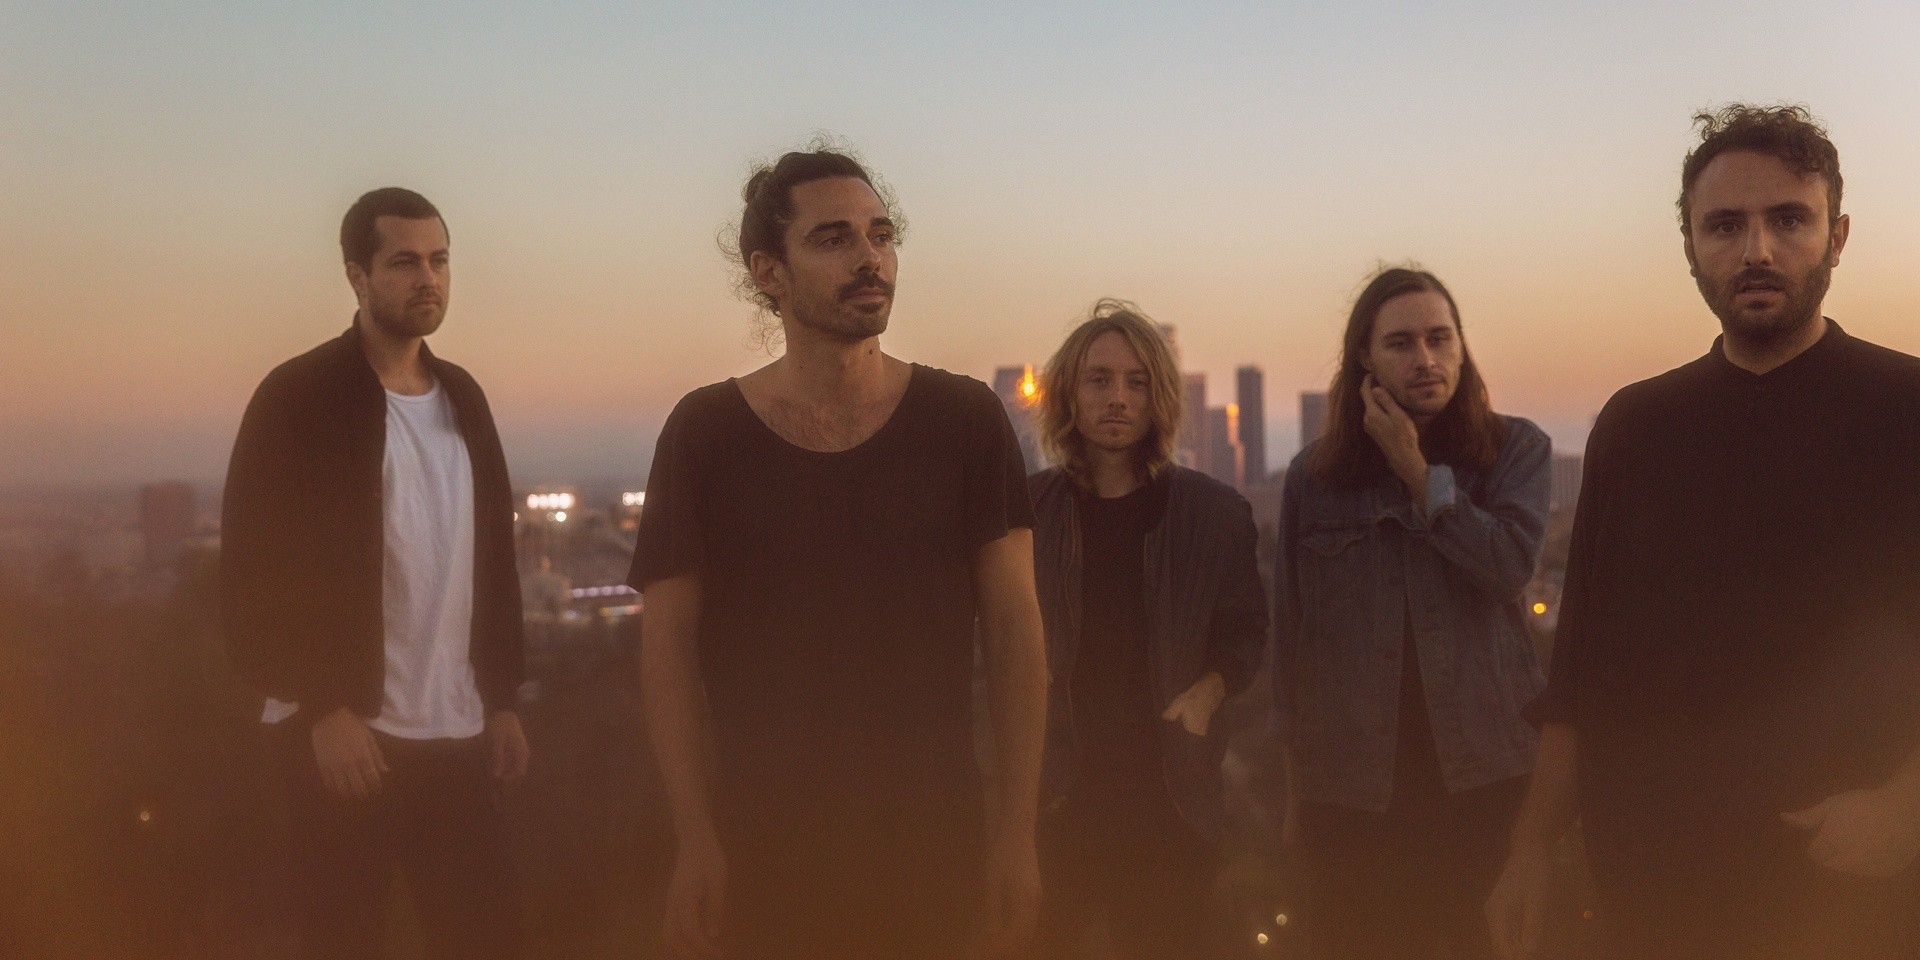 Local Natives will perform in Singapore in July 